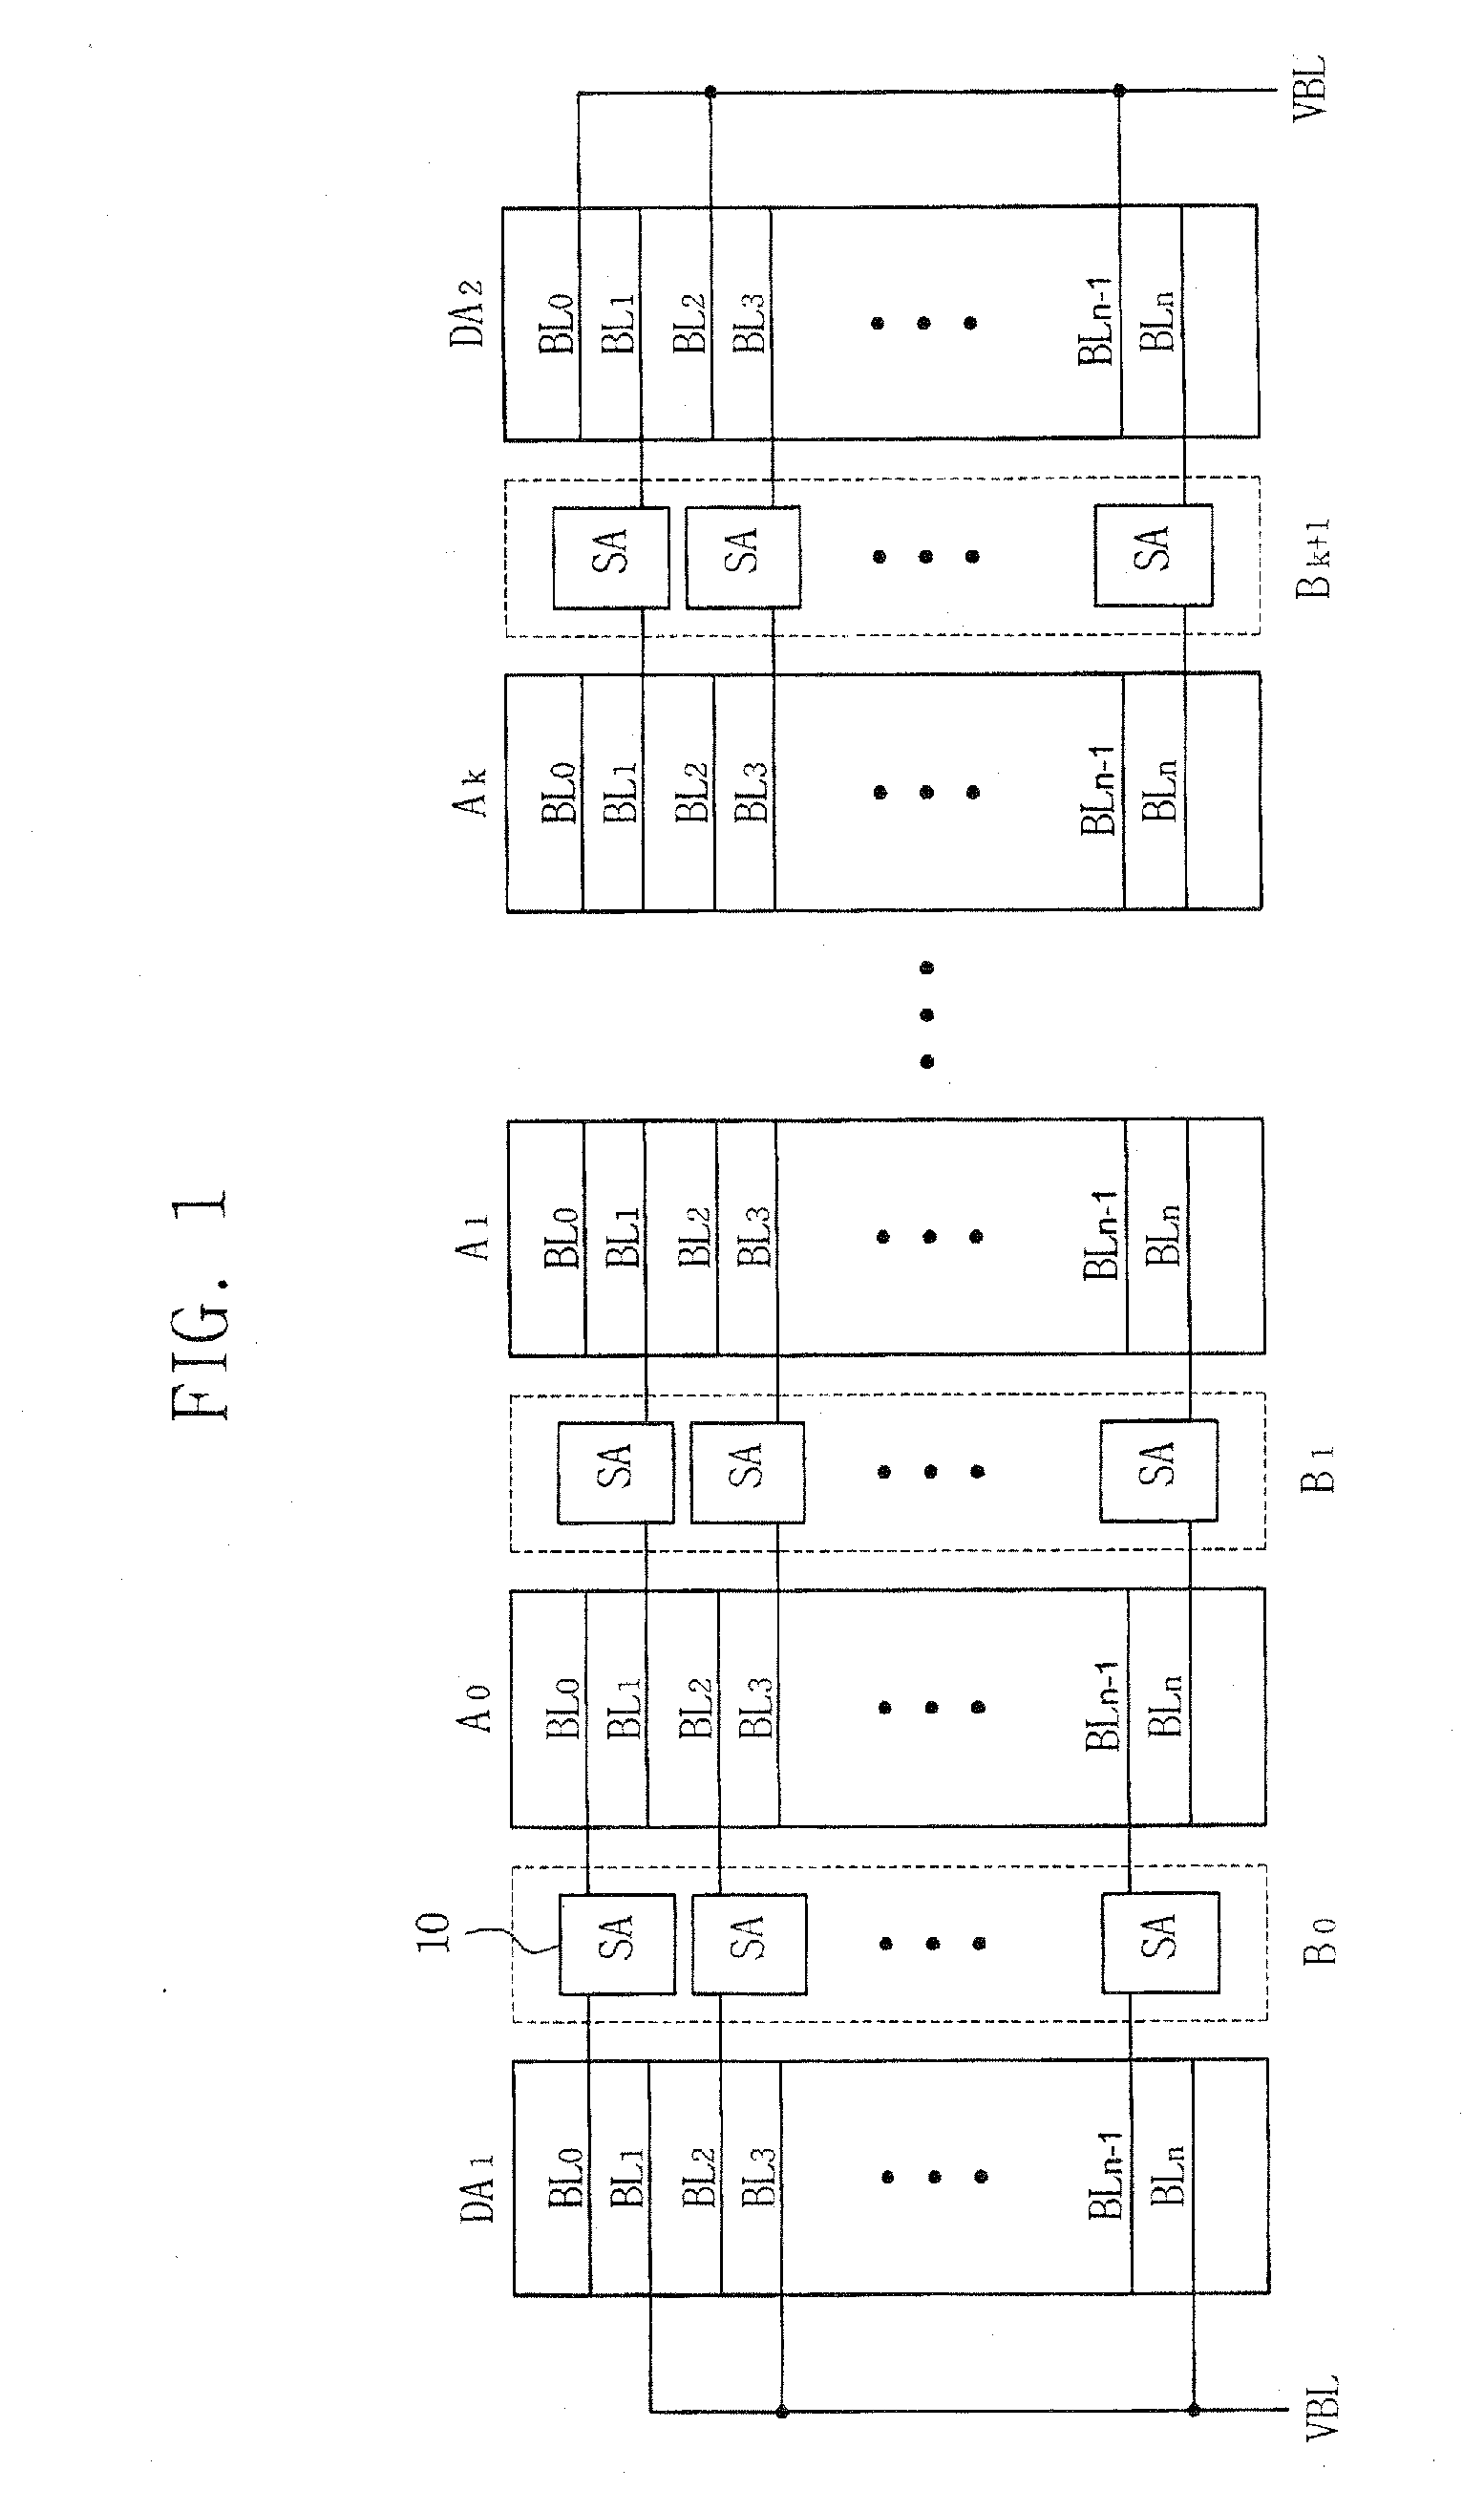 Semiconductor memory device having dummy sense amplifiers and methods of utilizing the same